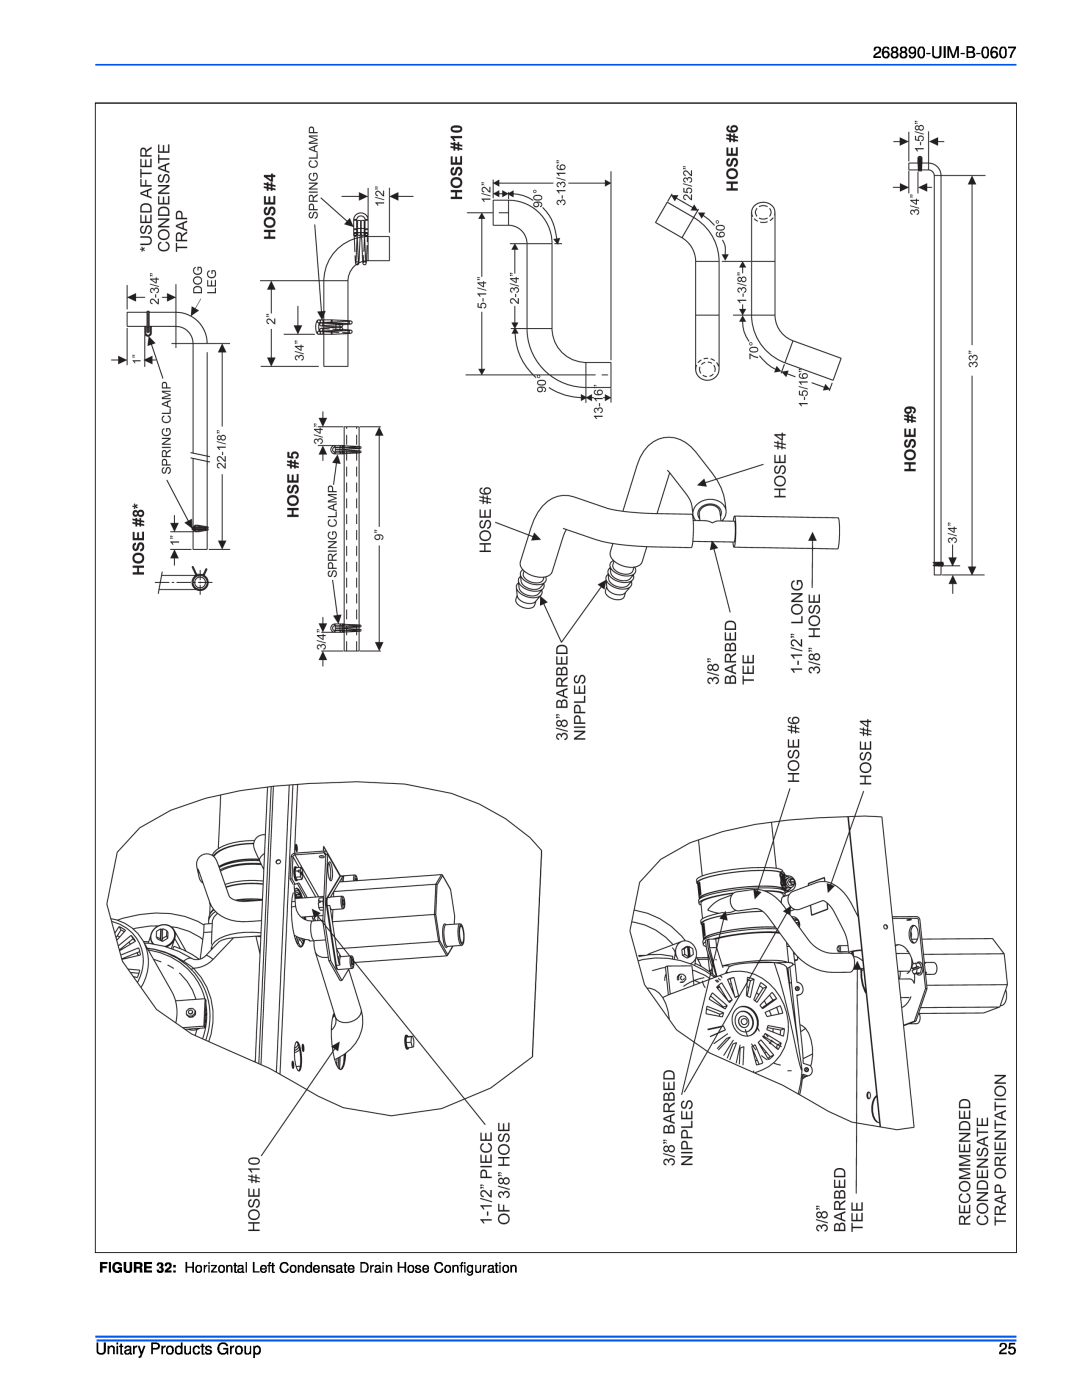 York GY9S*DH, GM9S*DH, GF9S*DH installation manual HOSE #10, HOSE #6, HOSE #4, HOSE #5, Hose, HOSE #8 